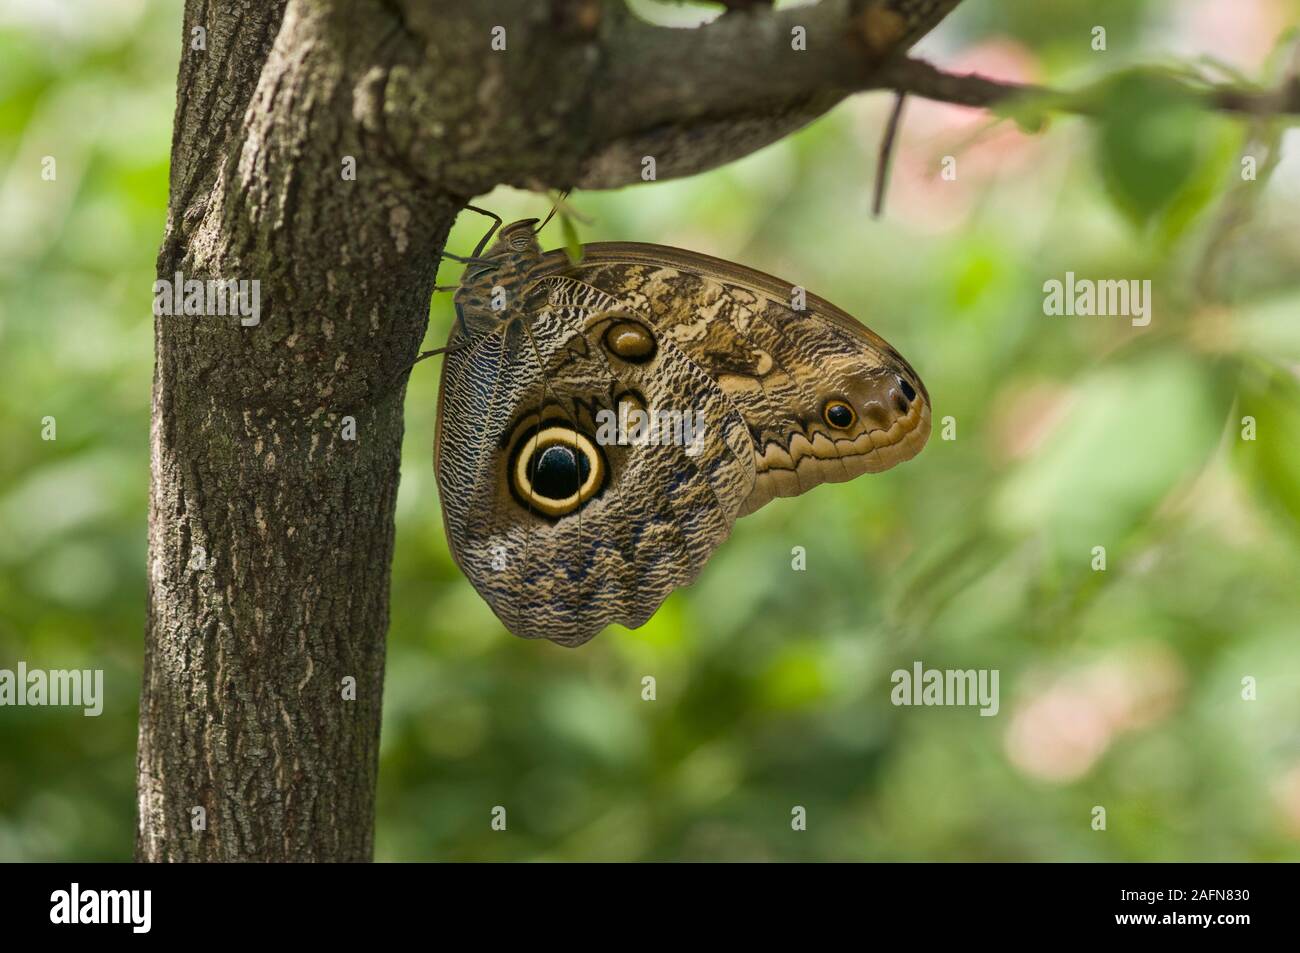 St. Paul, Minnesota. Butterfly Garden.  Common Giant Owl butterfly;  " Caligo eurilochus" on side of a tree. Native to South America. Stock Photo